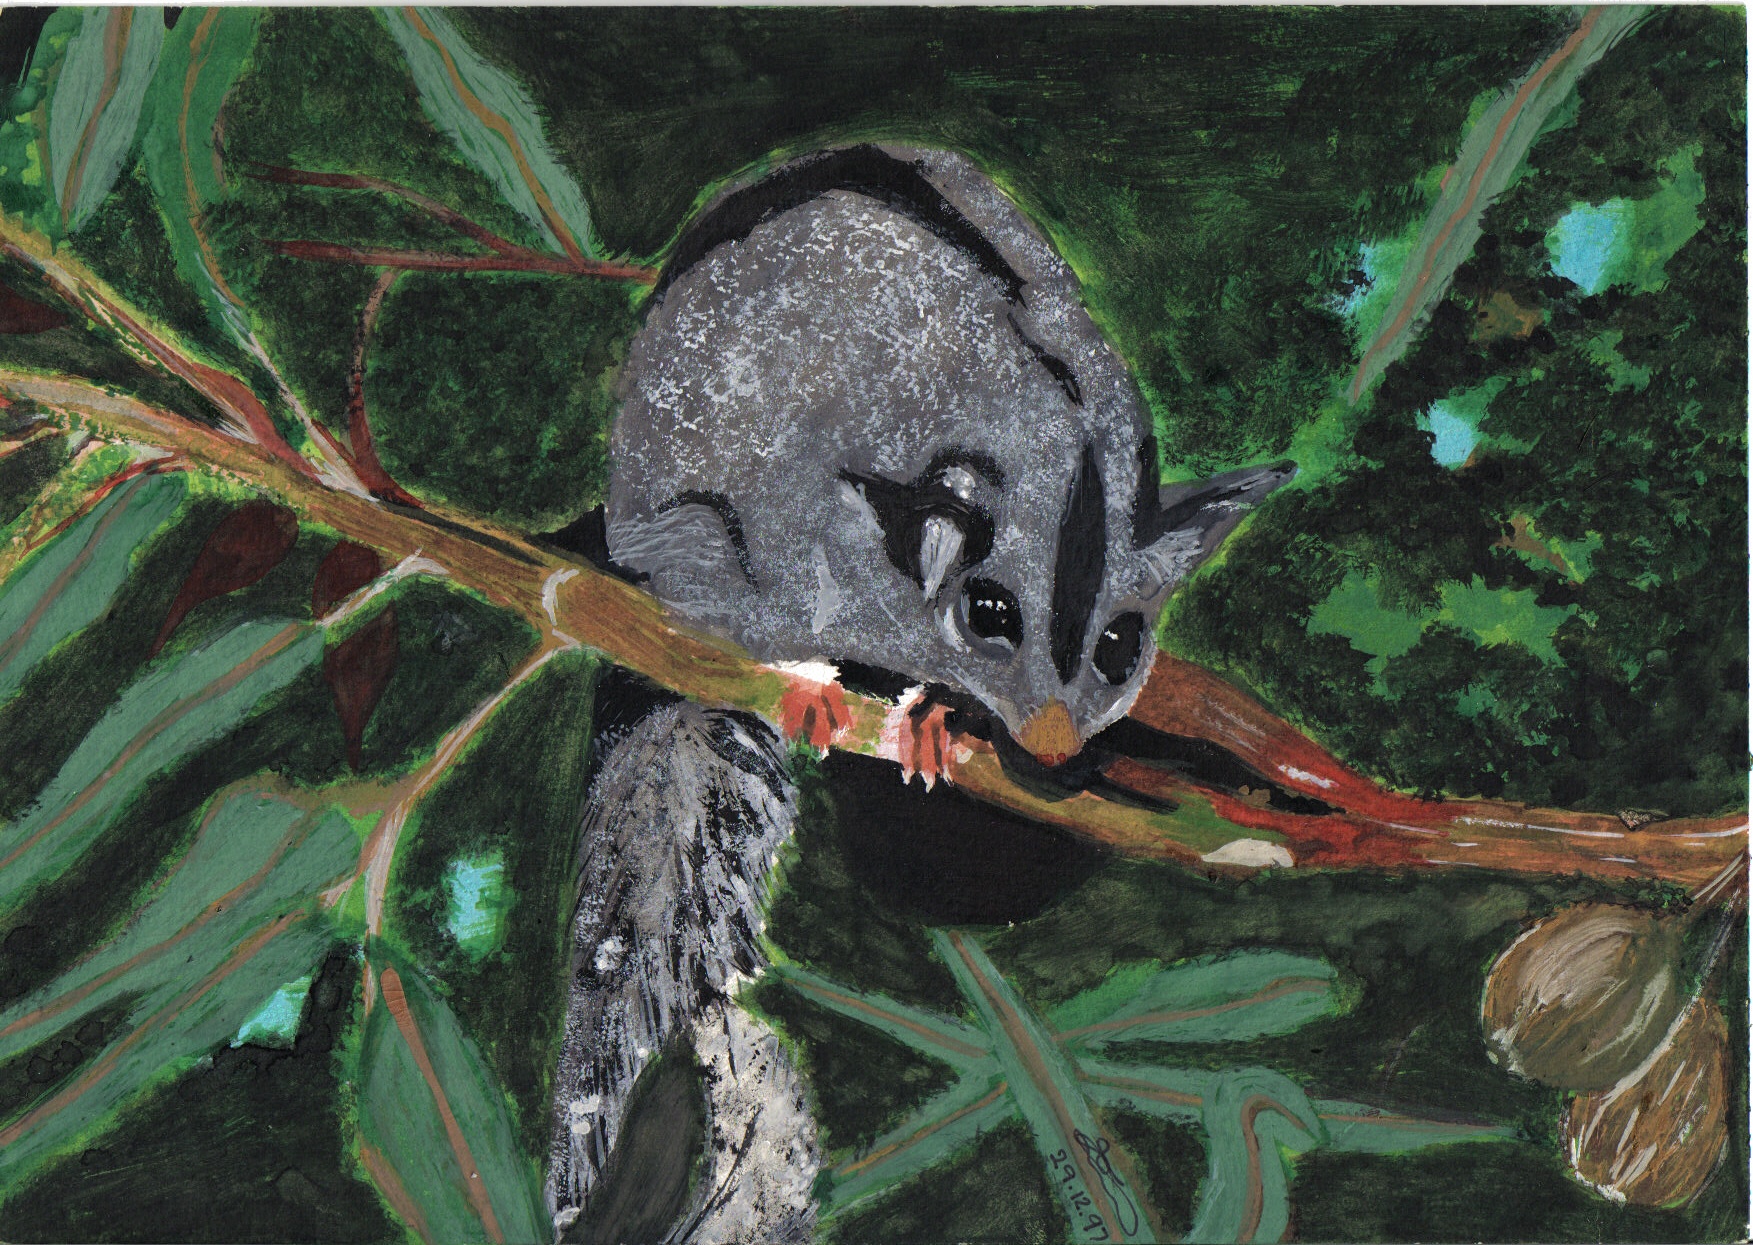 Painting of a possum I did in a tree at our house